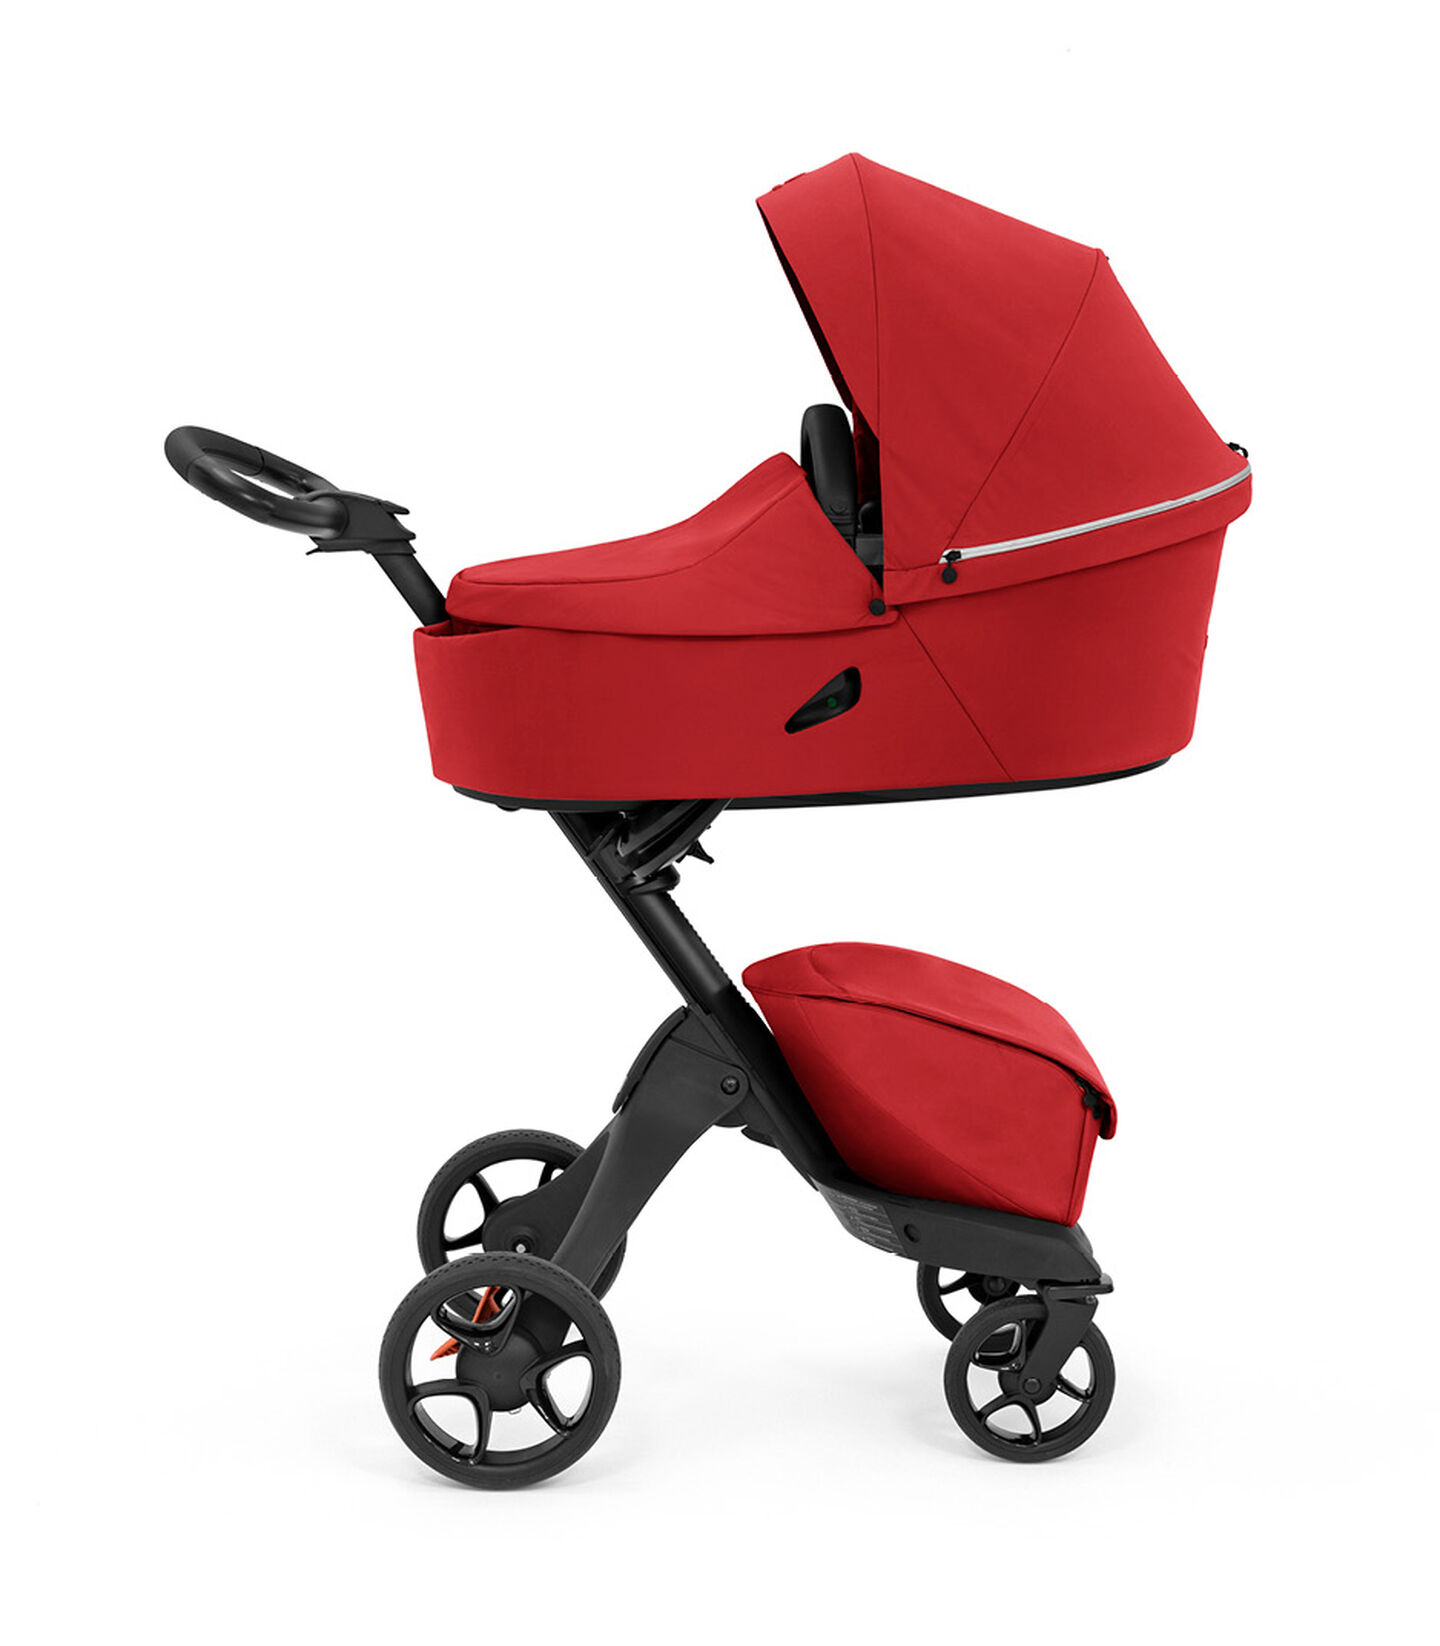 Stokke® Xplory® X Babyschale Ruby Red, Ruby Red, mainview view 2